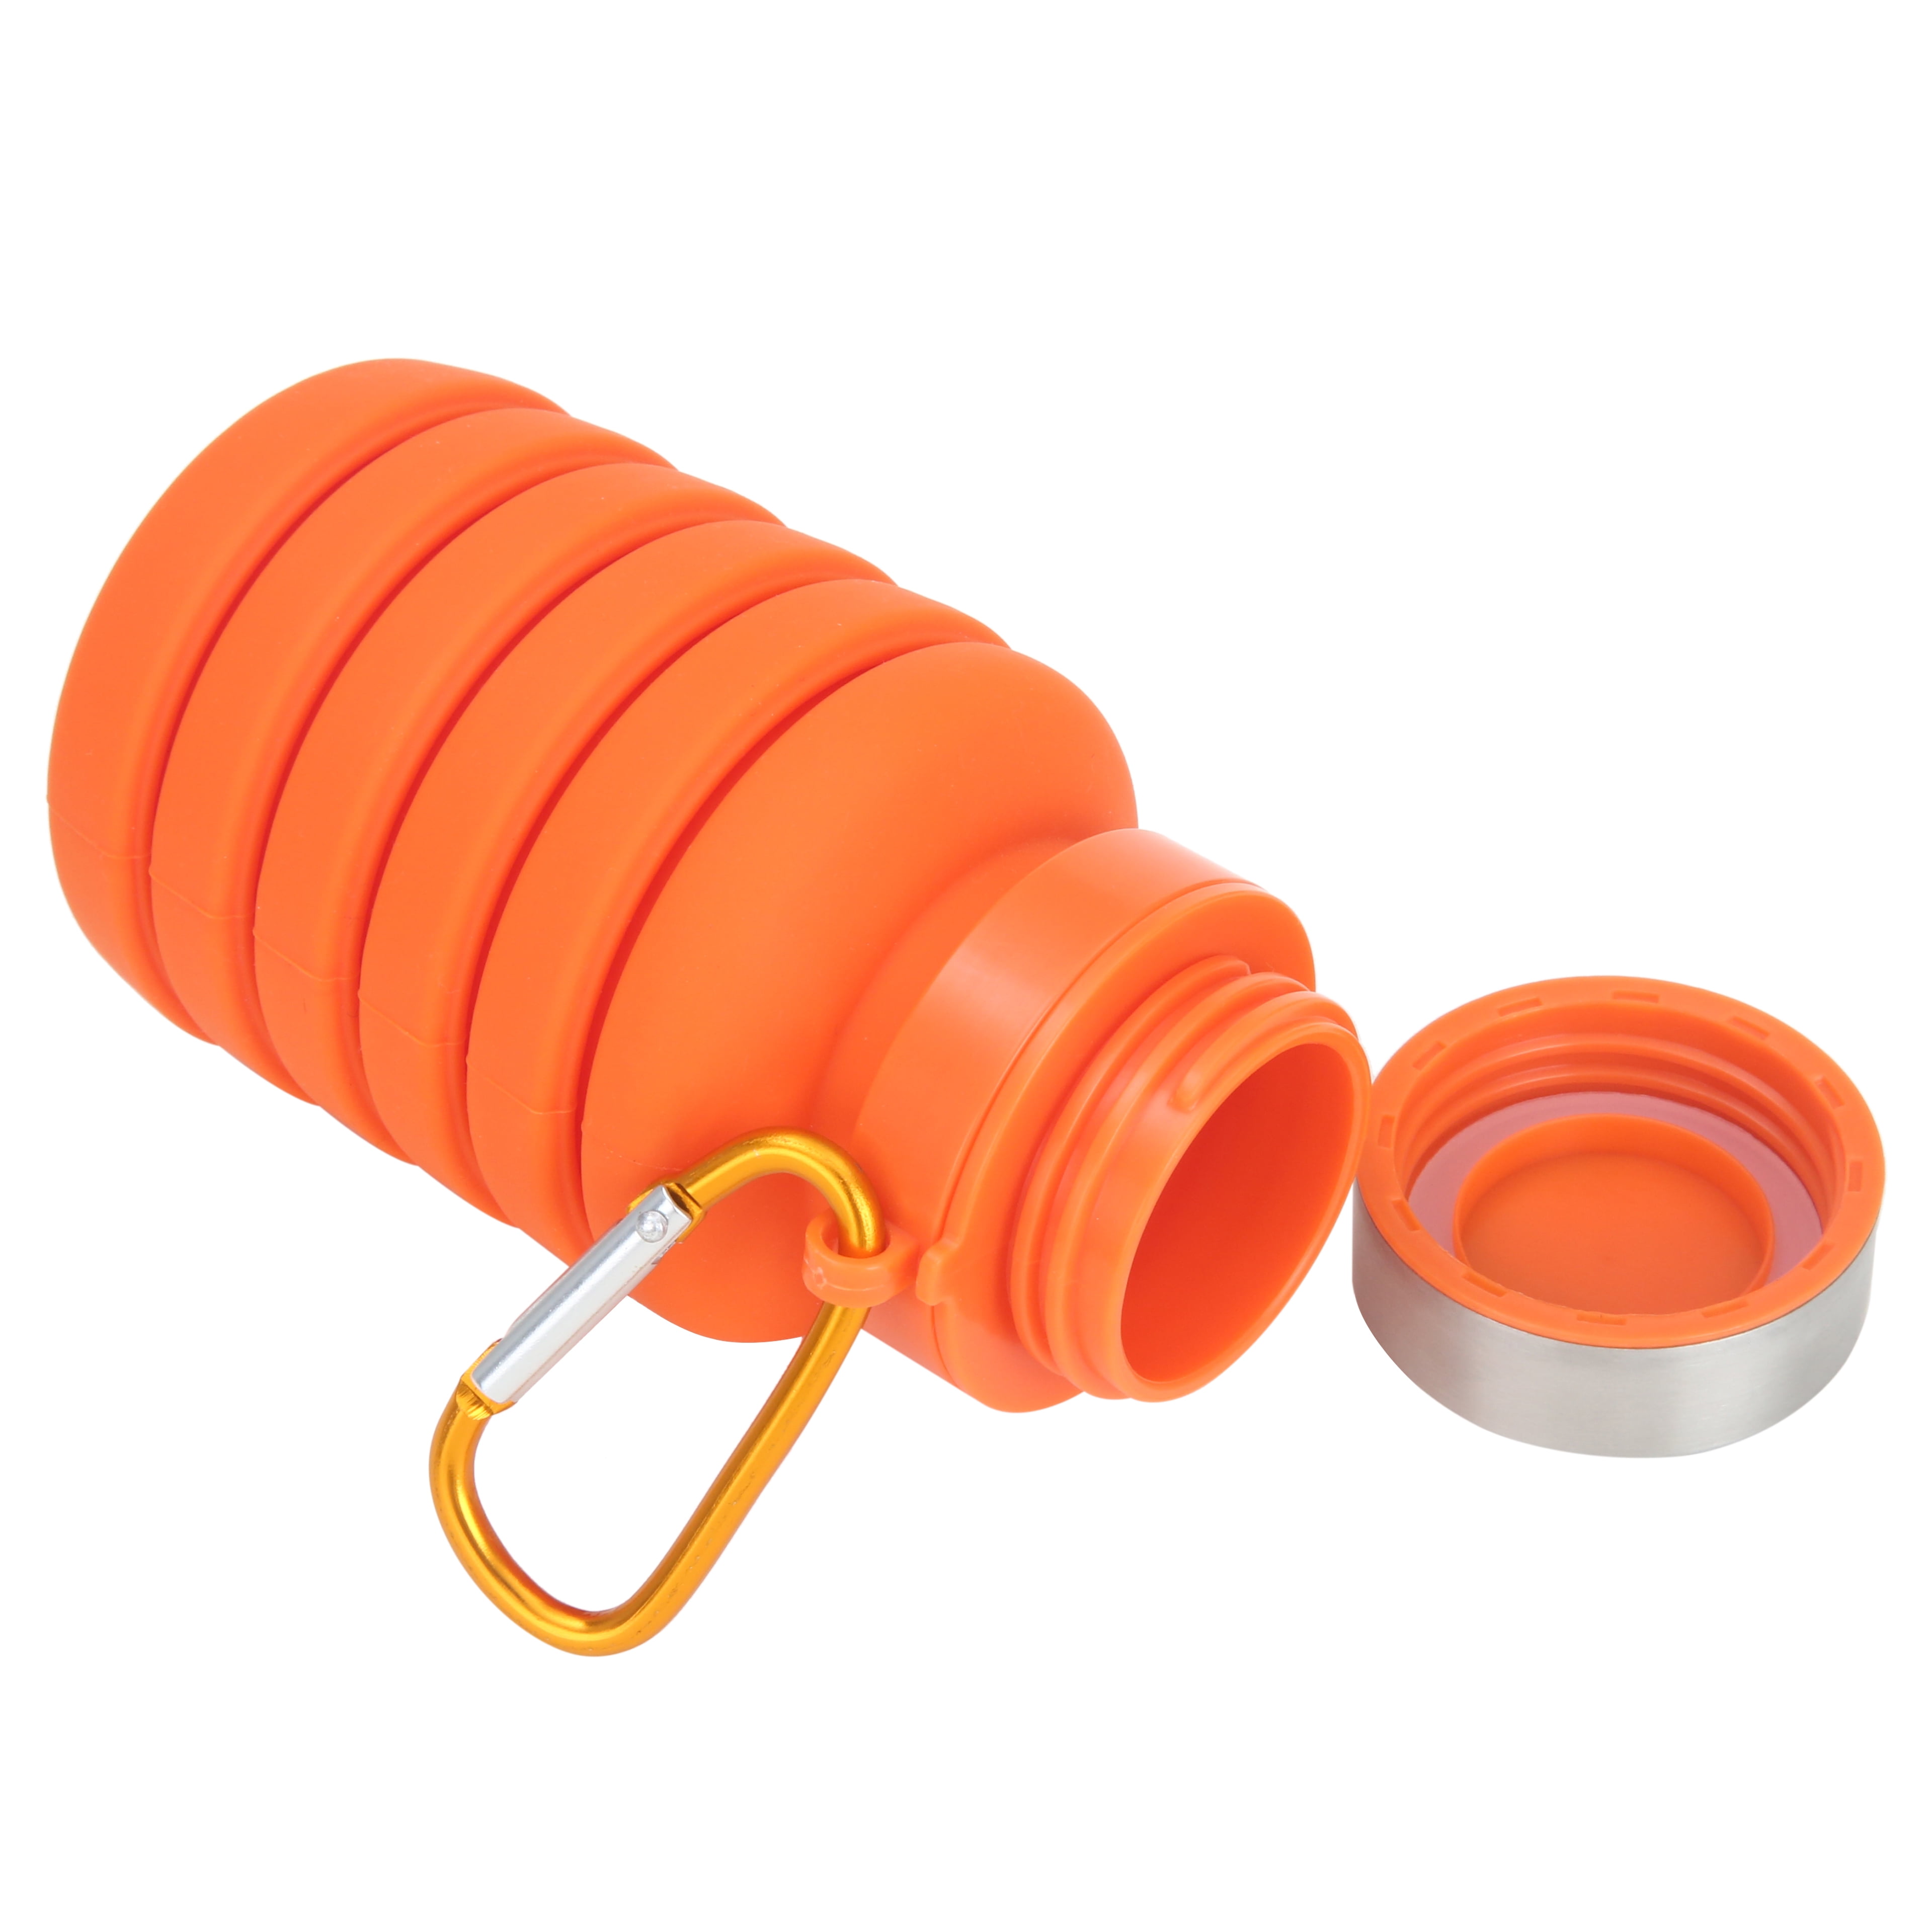 Amerteer Collapsible Silicone Sports Water Bottle - Compact